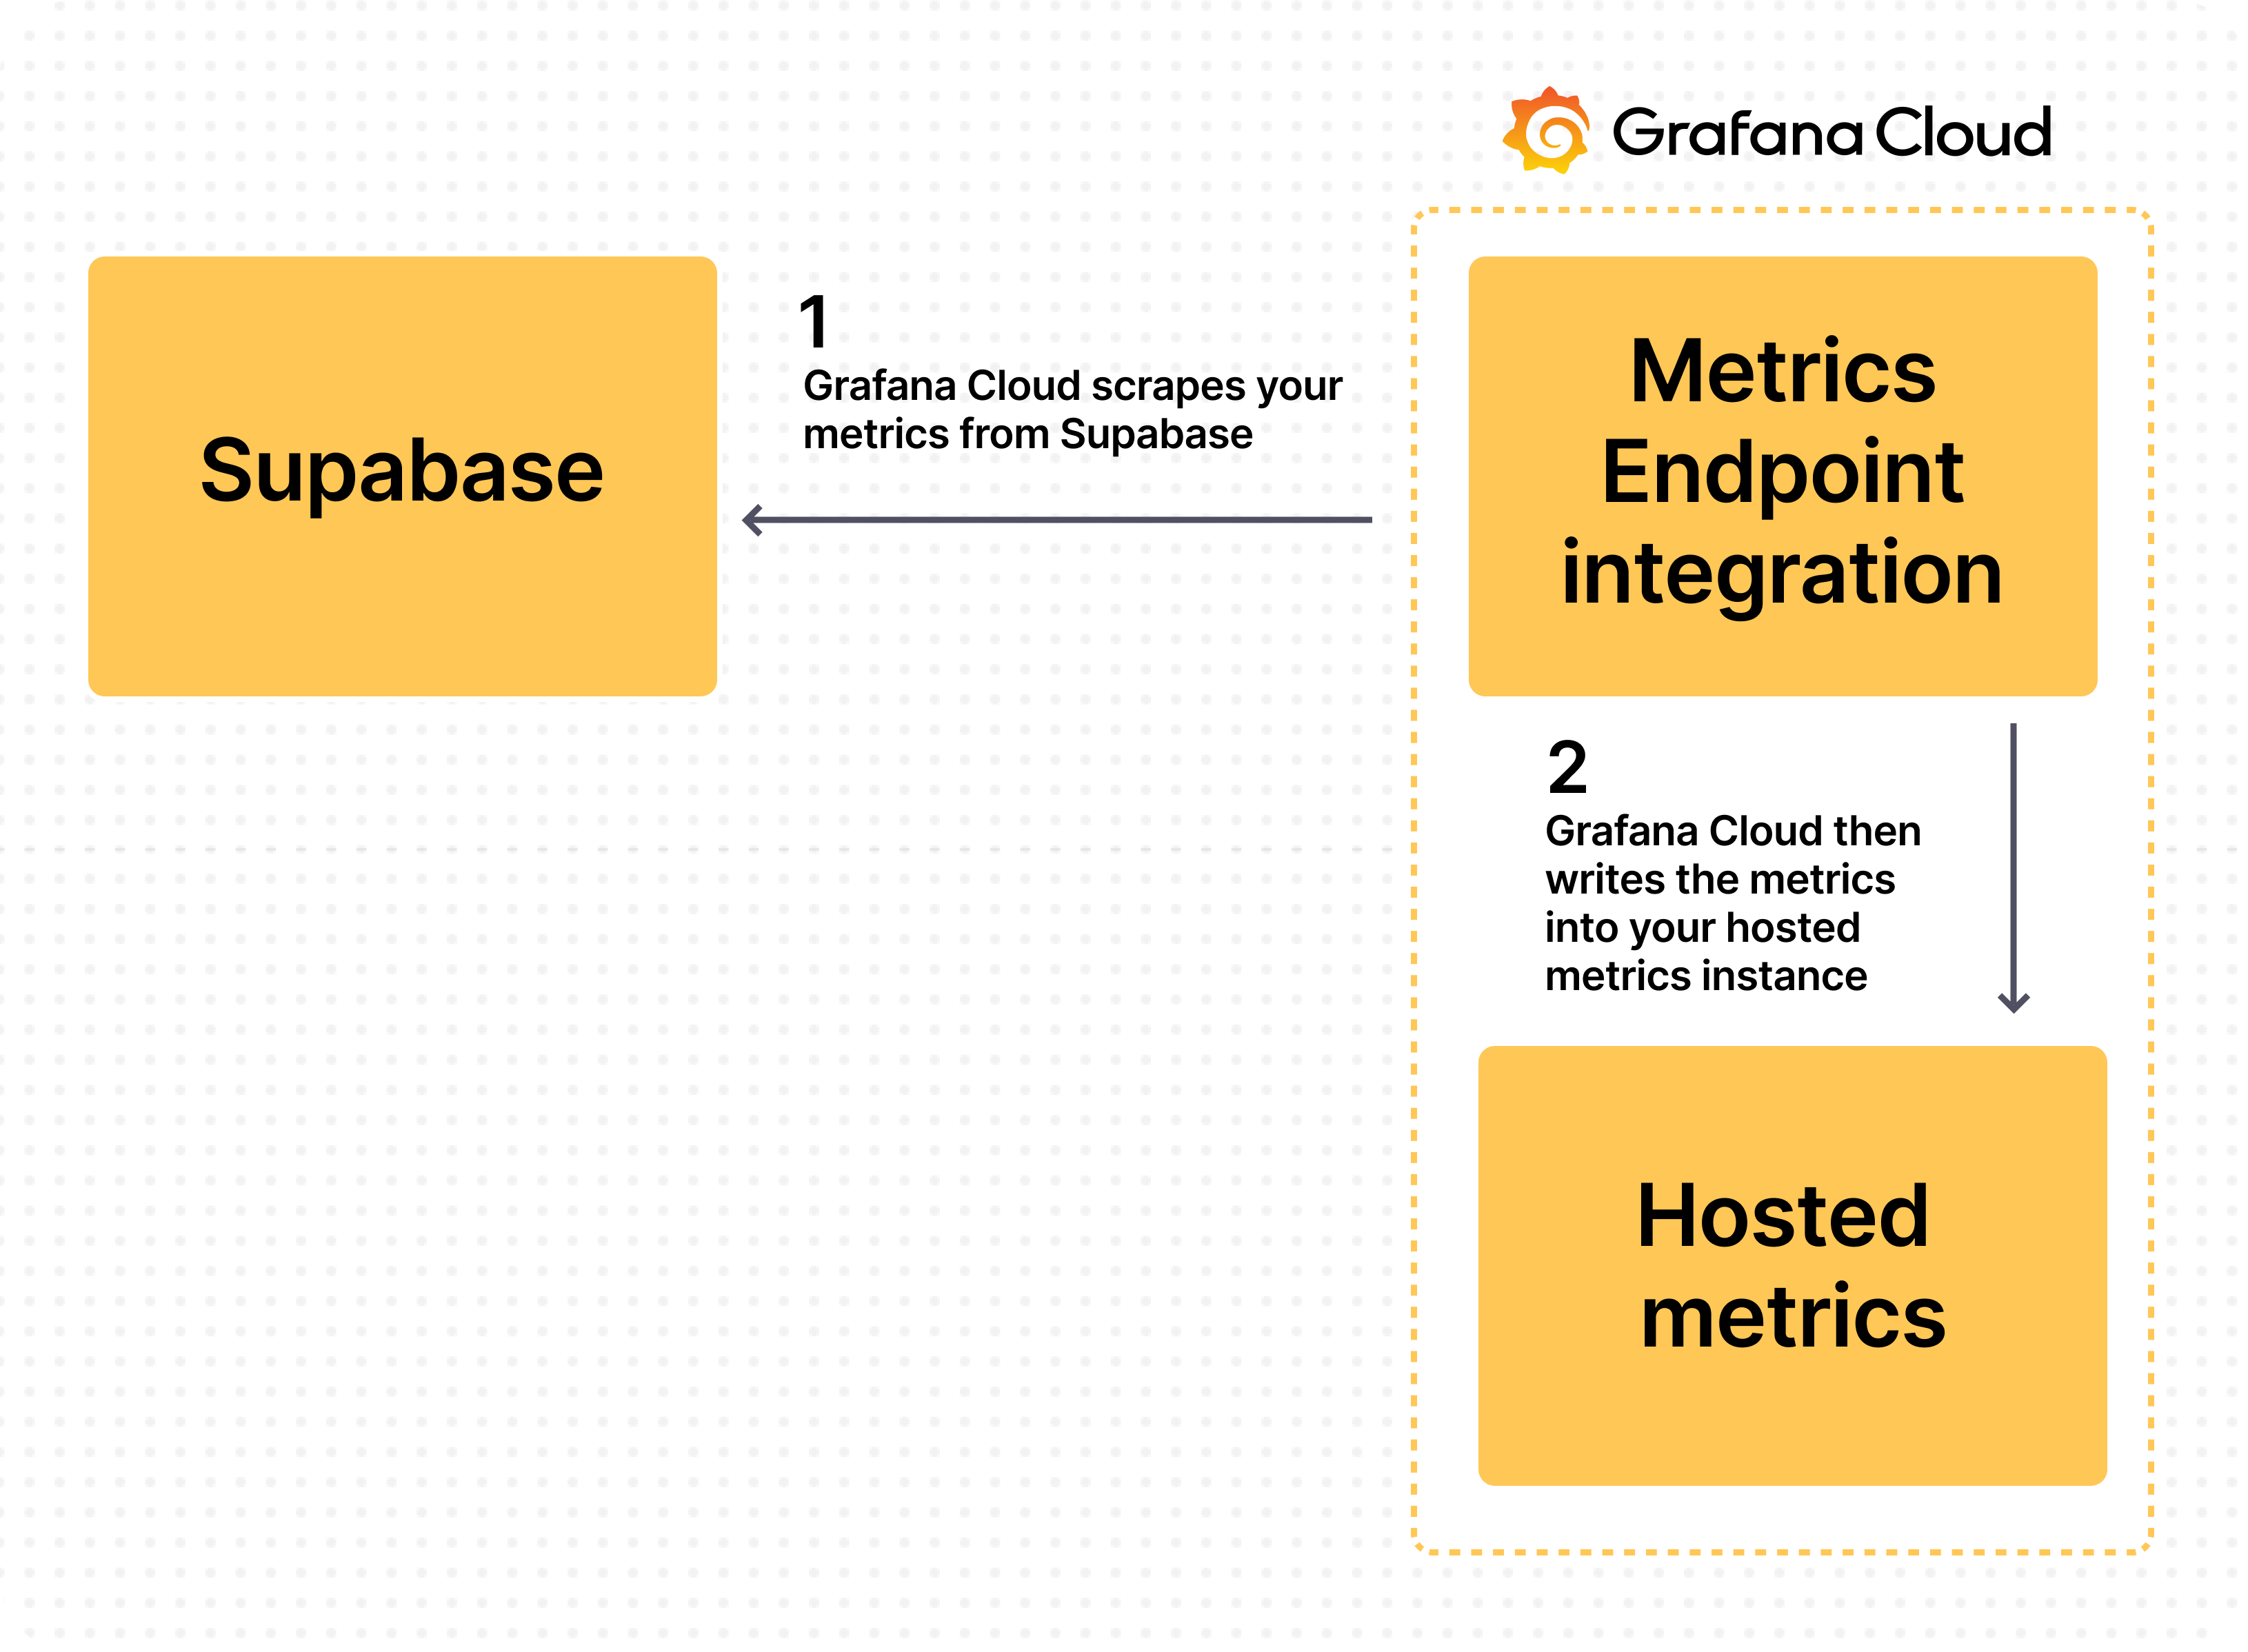 A diagram shows how Grafana Cloud scrapes metrics from Superbase, then writes the metrics to a hosted instance.